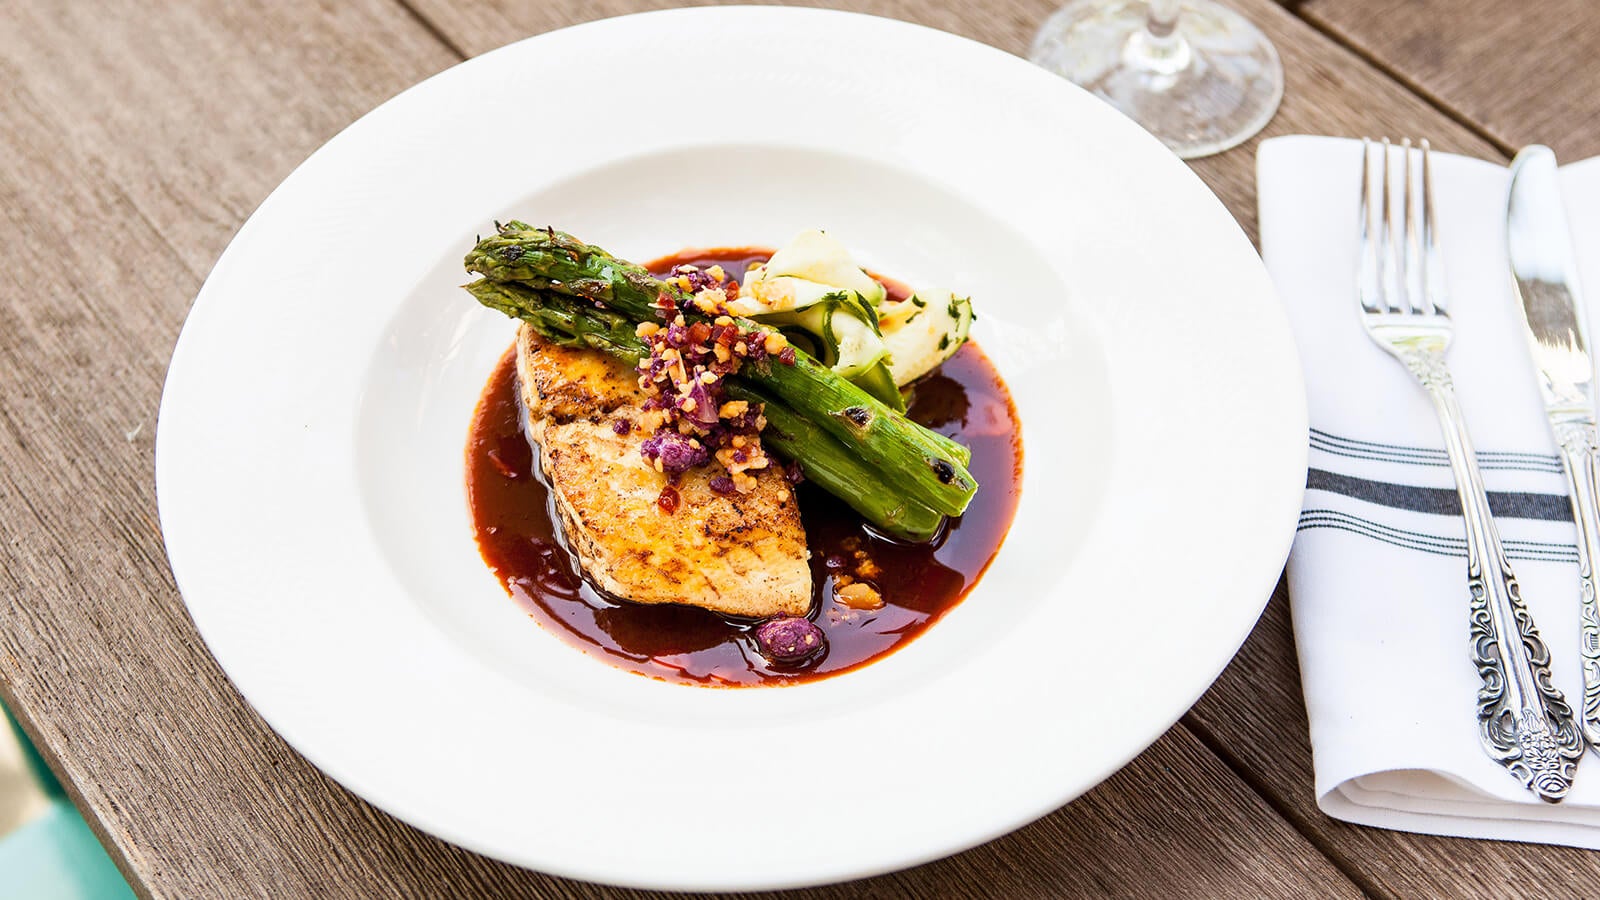 Grilled salmon with asparagus and brown butter sage sauce